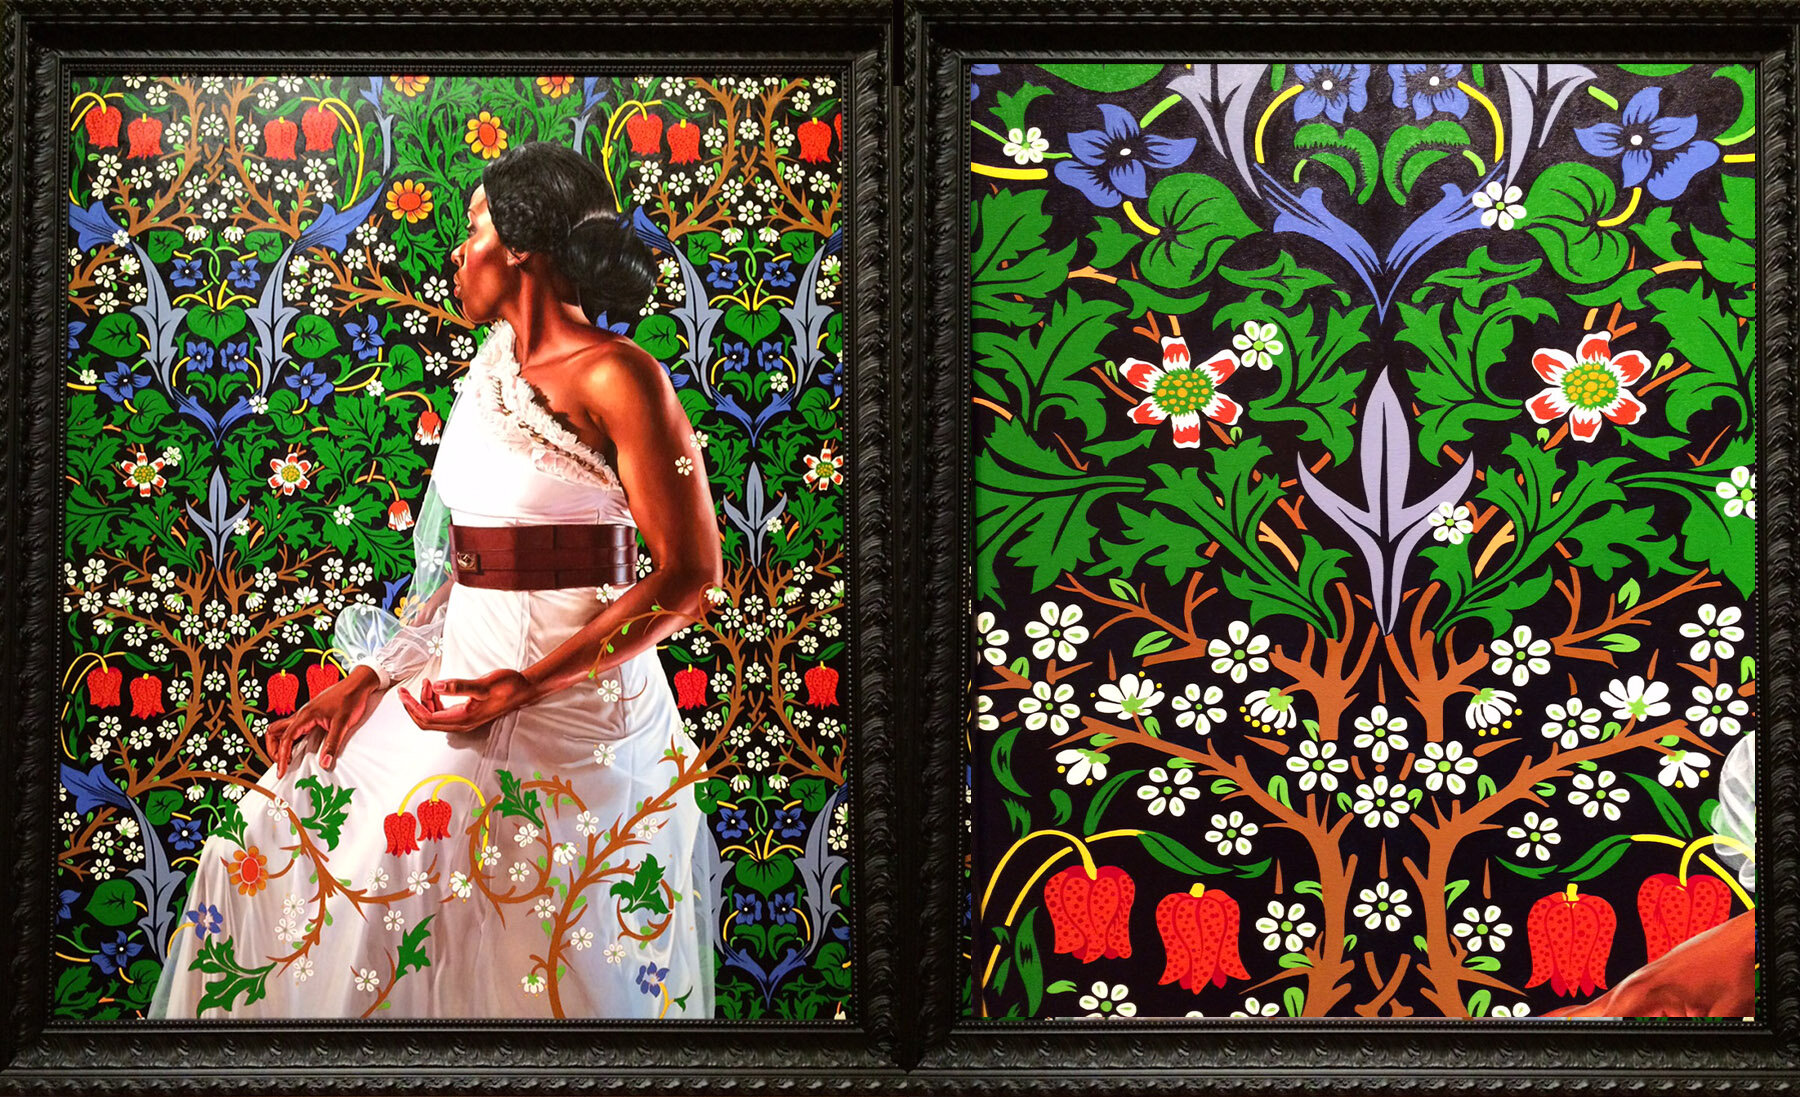 Painting by Kehinde Wiley, 